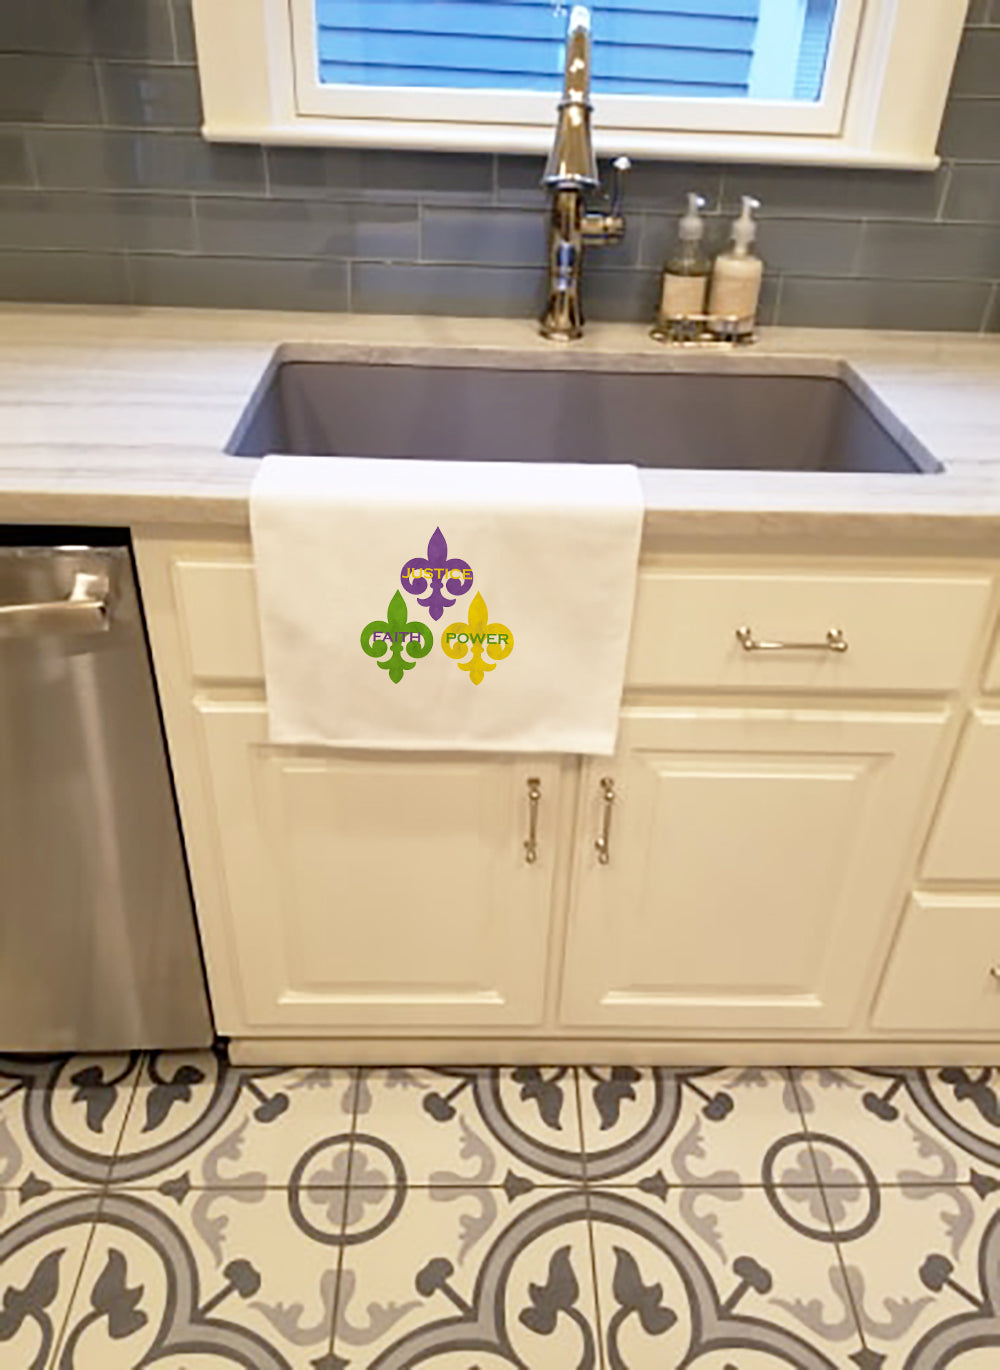 Justice Faith Power Mardi Gras White Kitchen Towel Set of 2 Dish Towels - the-store.com